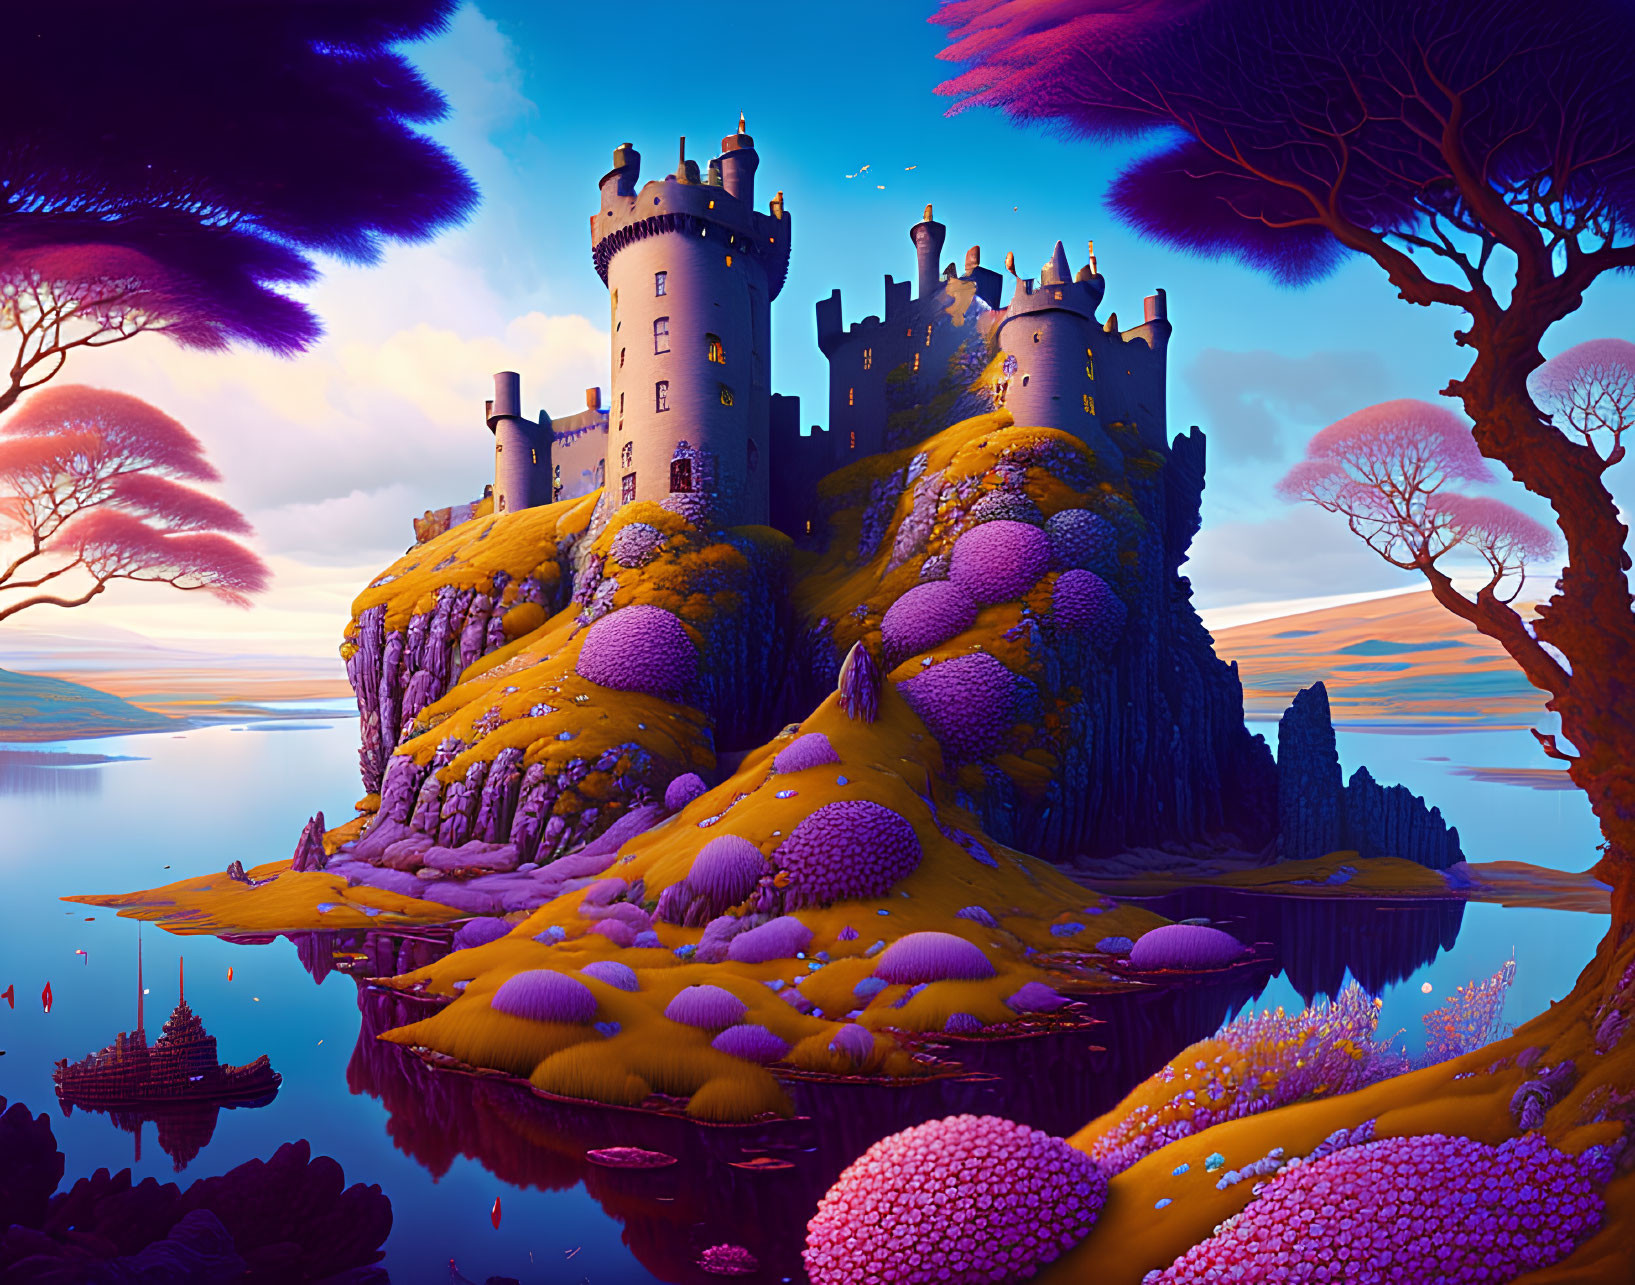 Whimsical castle on vibrant hill with purple trees by tranquil lake